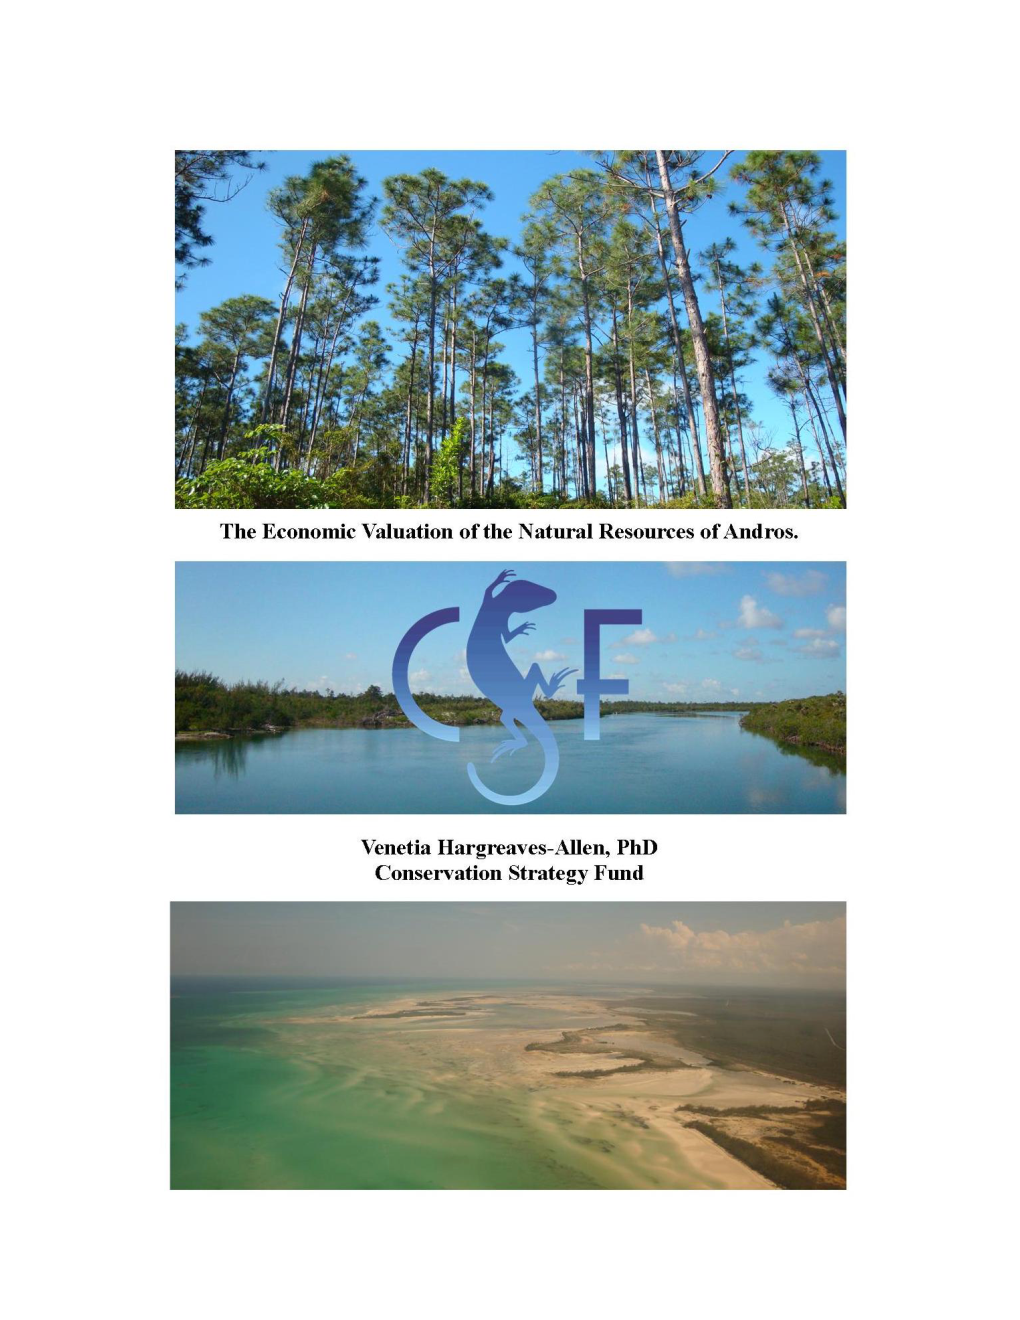 An Economic Valuation of the Natural Resources of Andros Islands, Bahamas